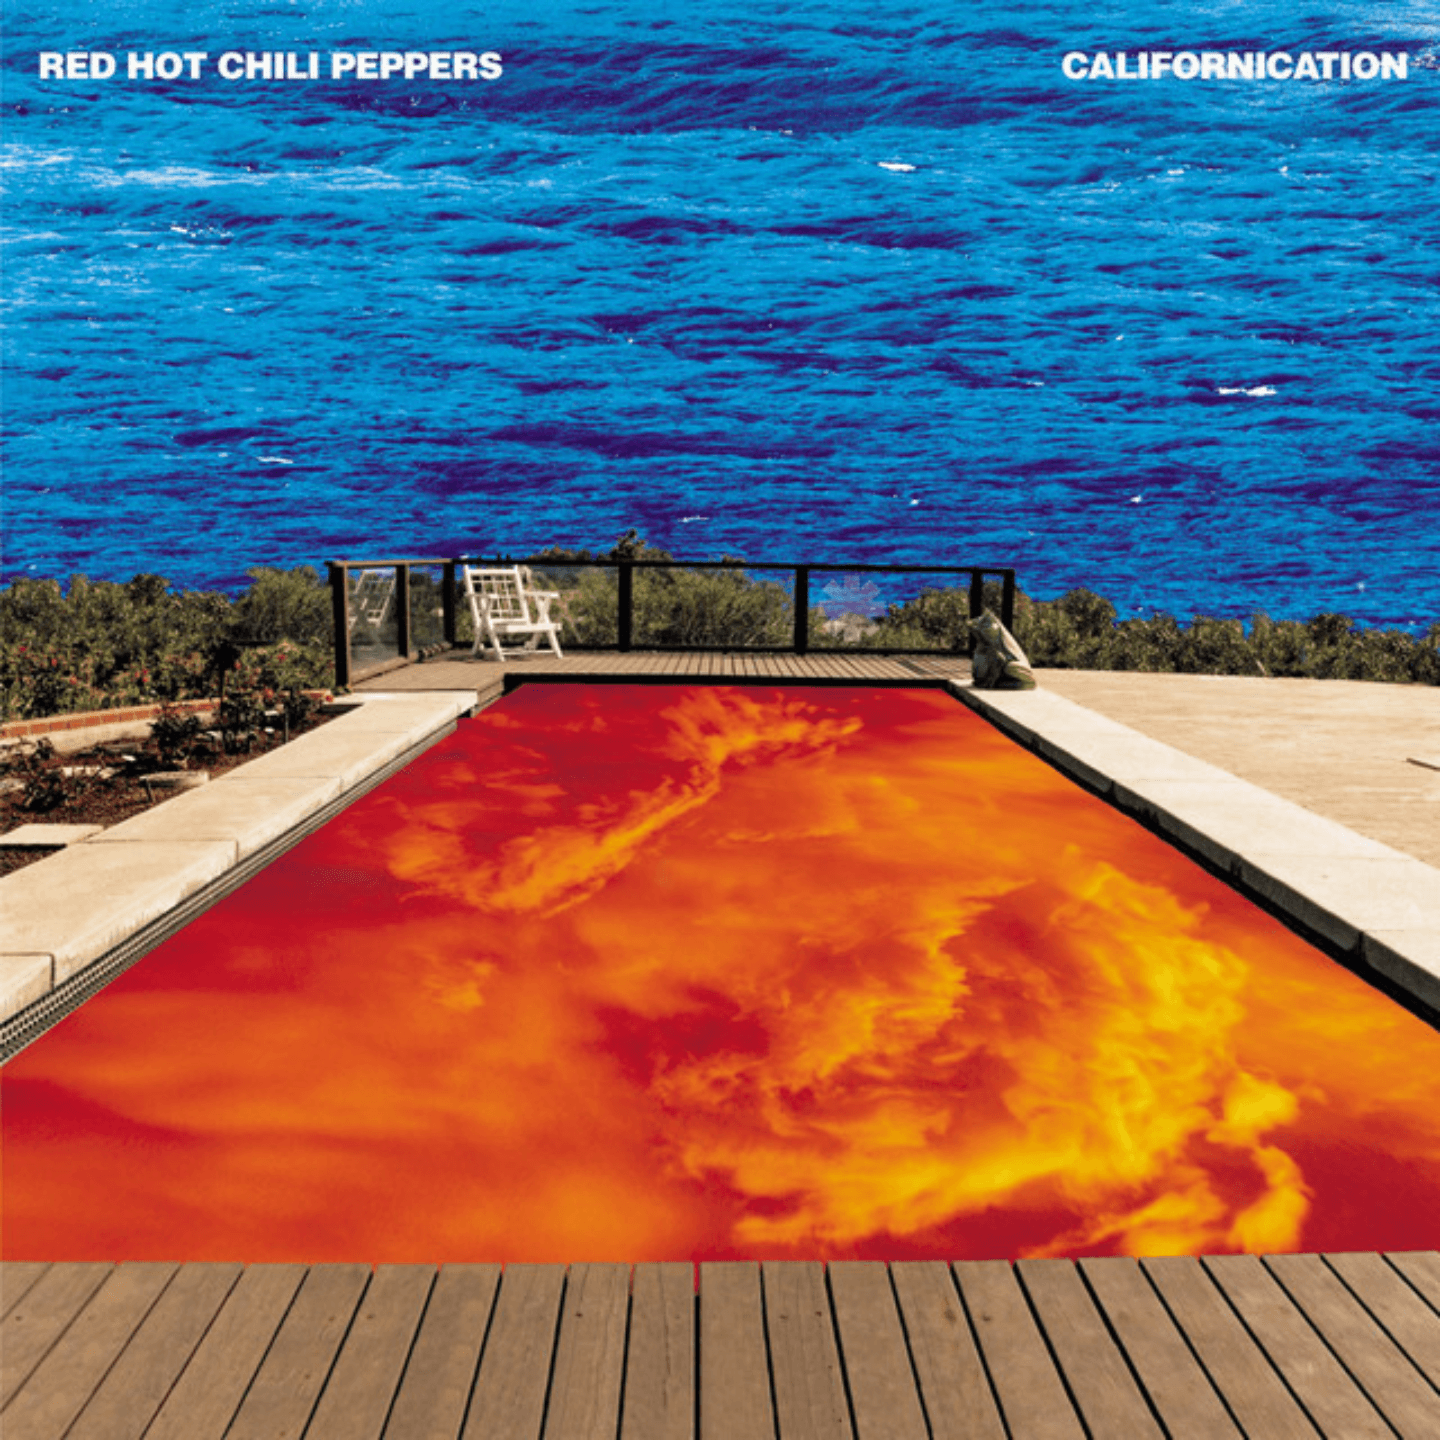 RED HOT CHILI PEPPERS - Californication 2xLP (180g Vinyl)